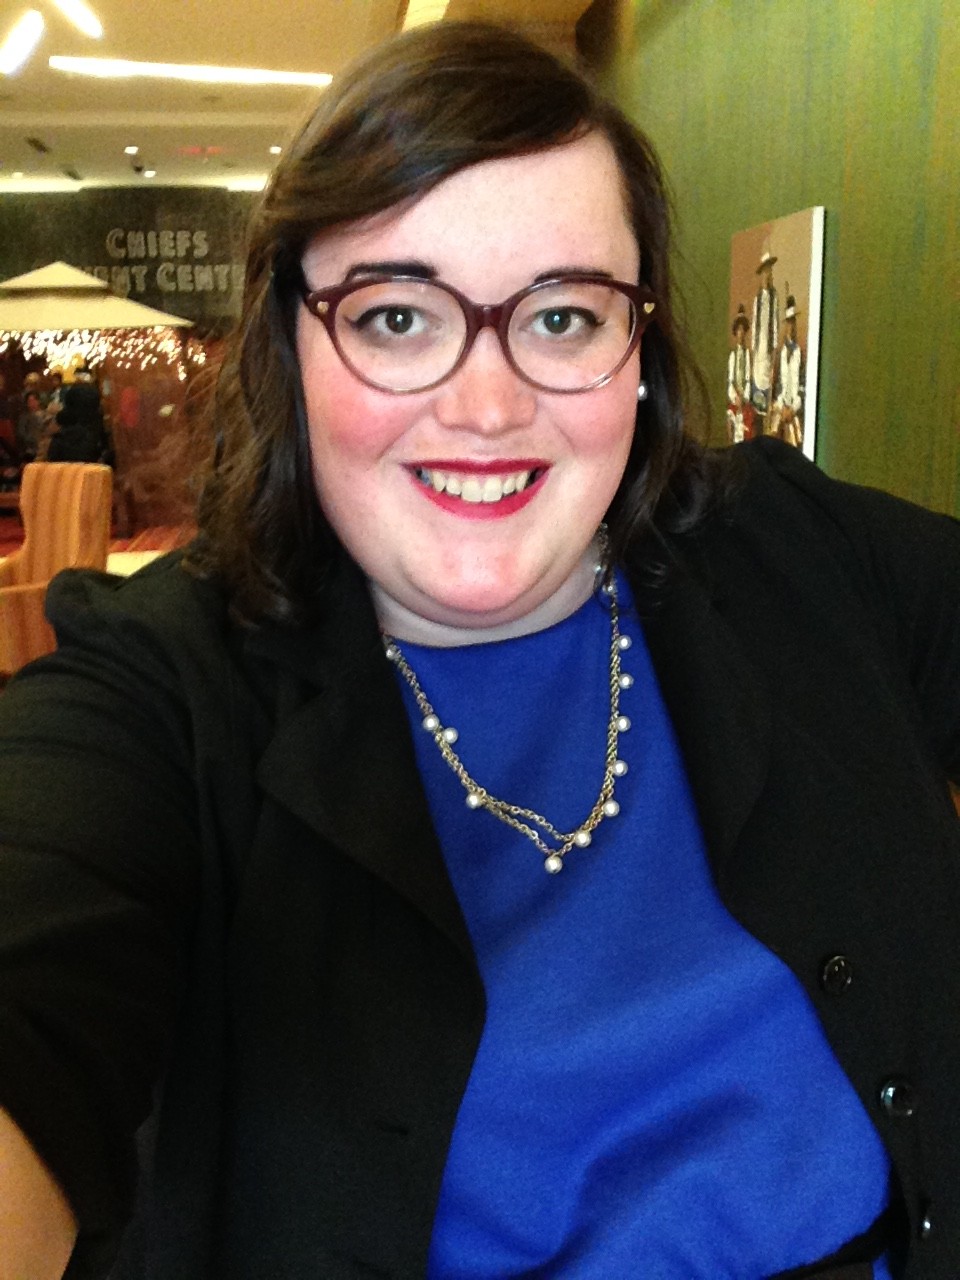 I wanted to get all cute for the caucus, so I wore my favorite blue dress, my red boots and this cute blazer. But as soon as the room got packed with 1,500 excited Idaho Democrats it got hot, so I took the blazer off.